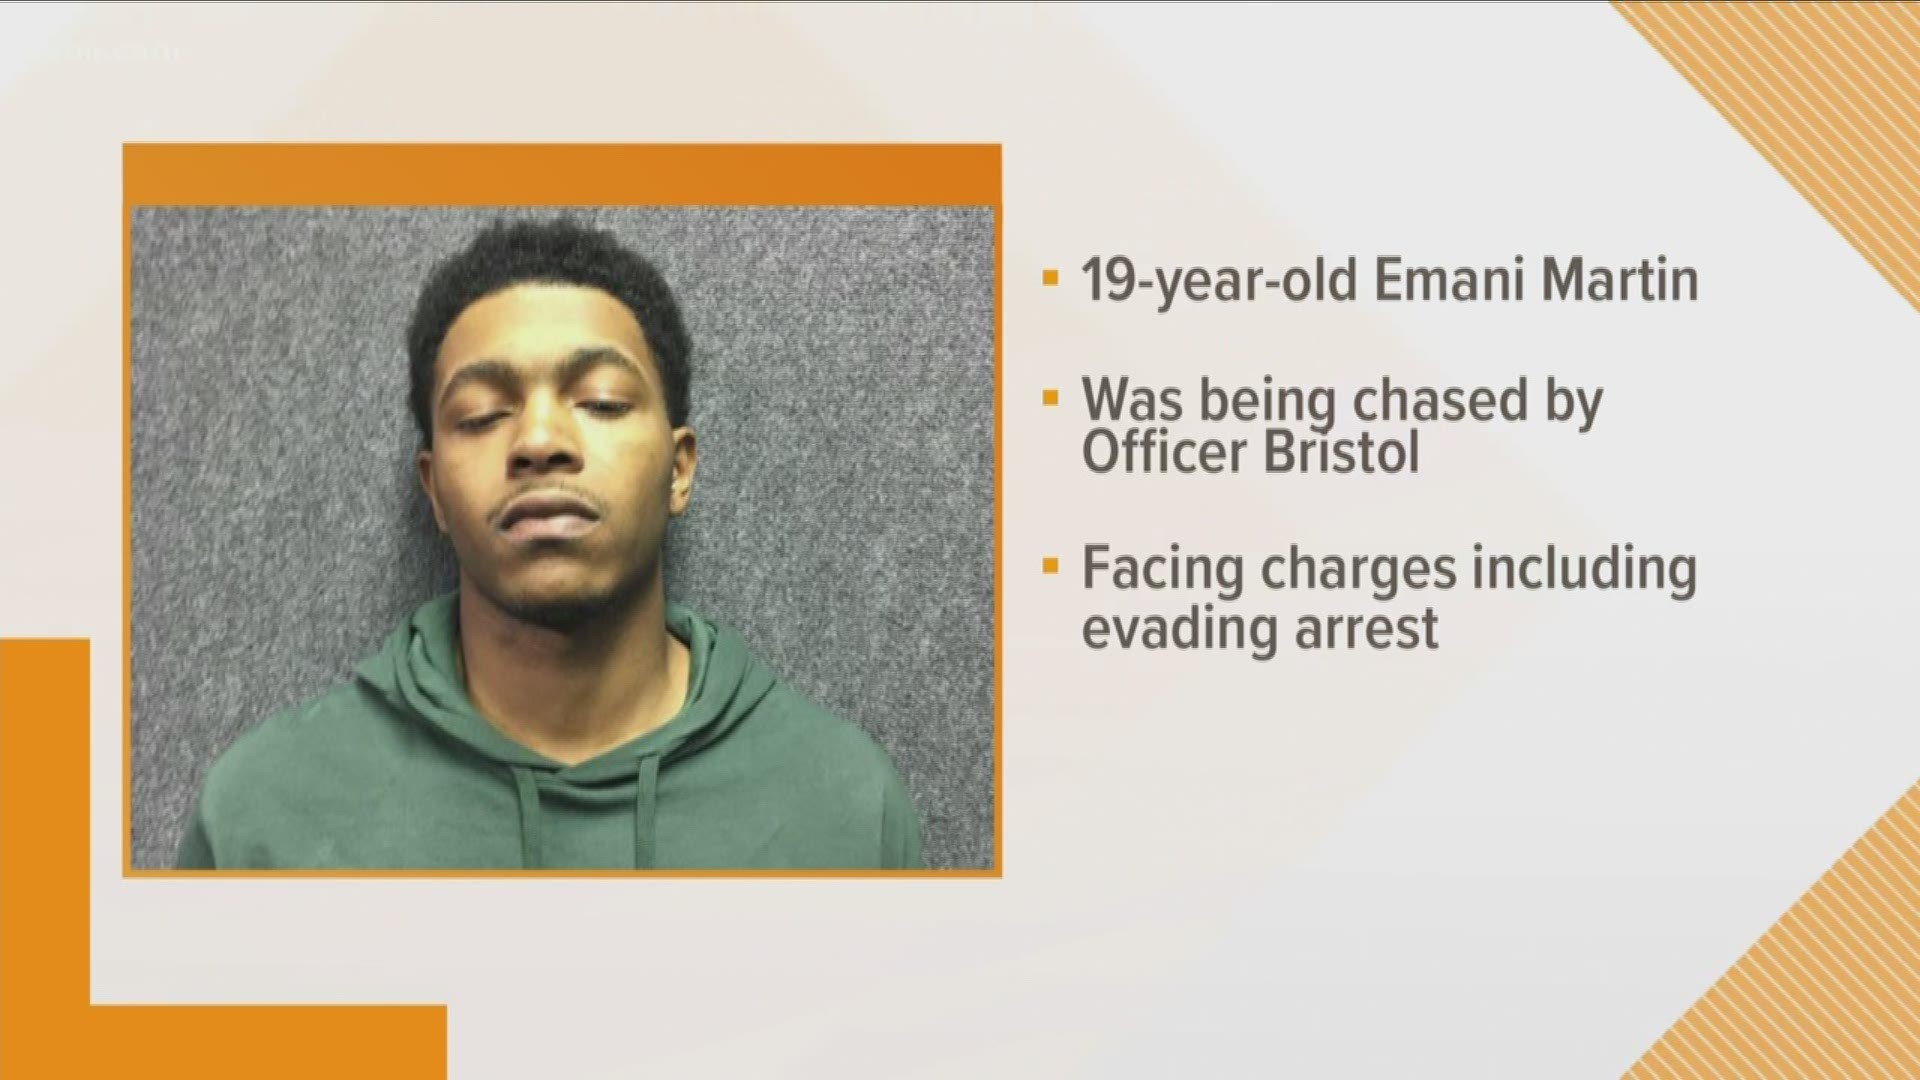 Emani Martin was the passenger in the vehicle that fled from Officer Spencer Daniel Bristol before he was struck by oncoming traffic on Monday night.